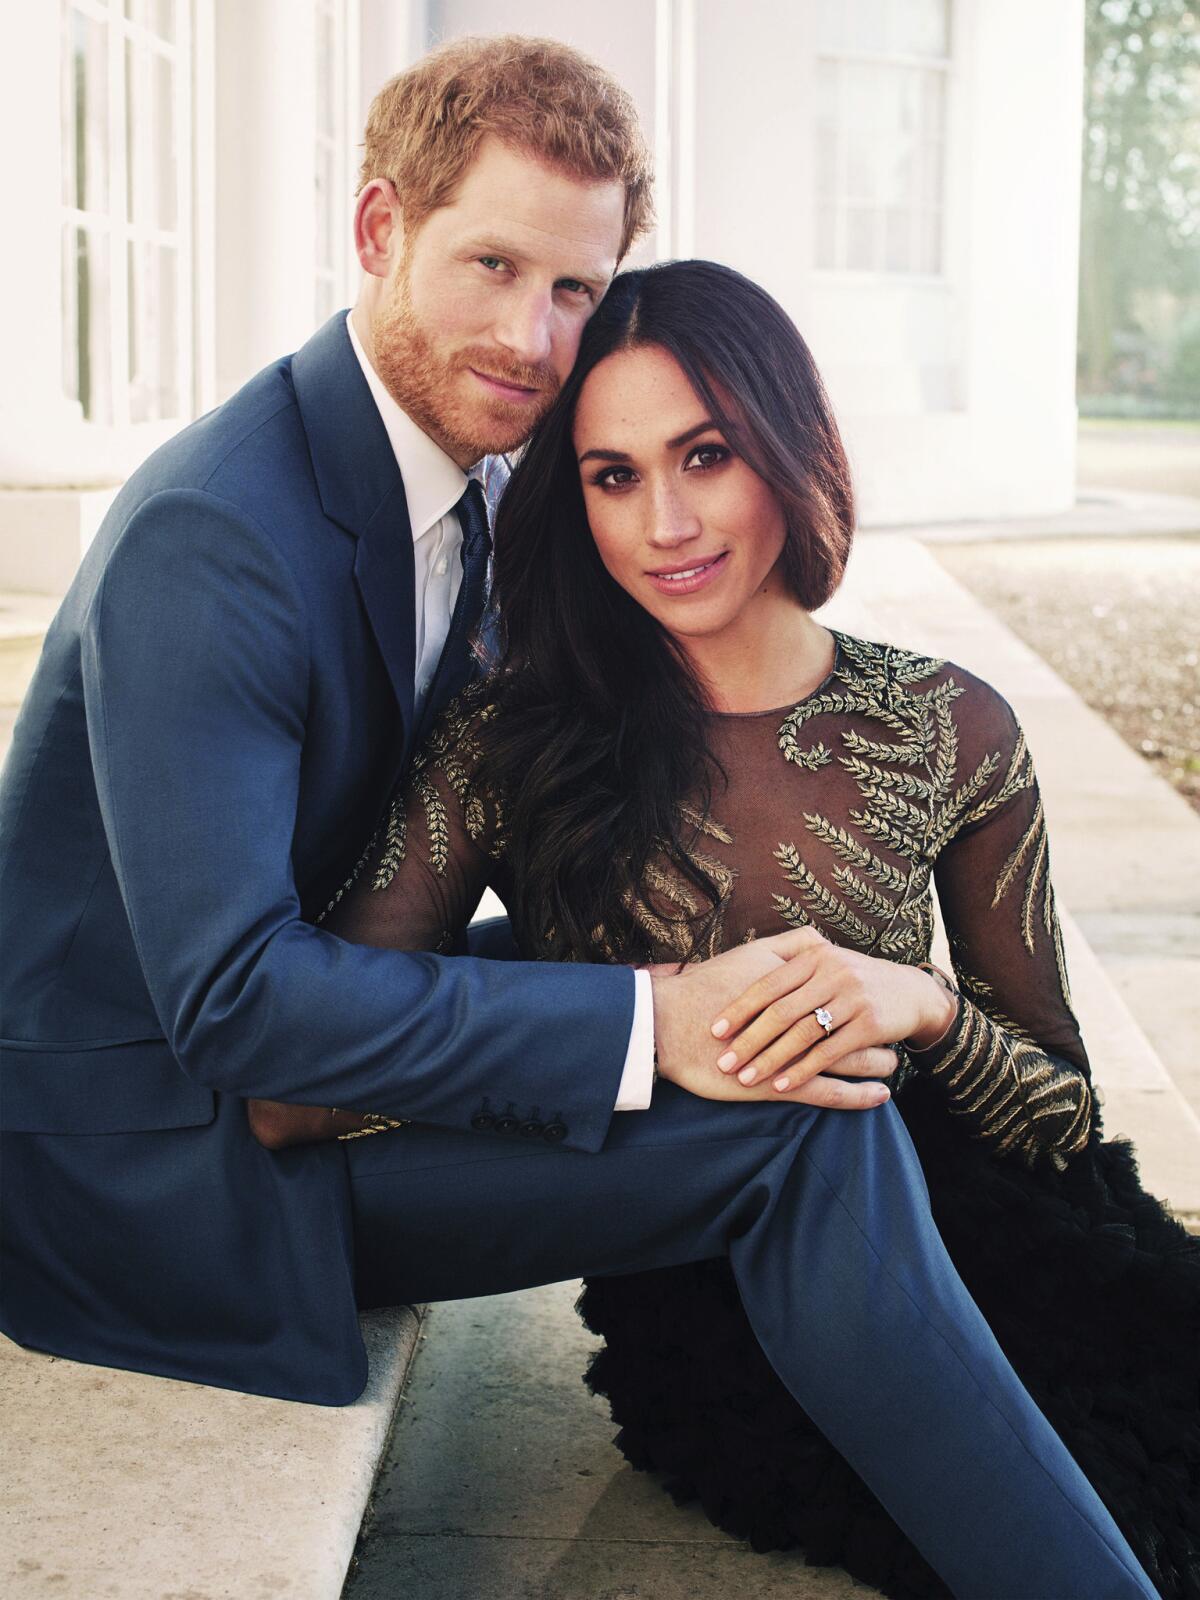 Britain's Prince Harry and Meghan Markle pose for one of two official engagement photos.